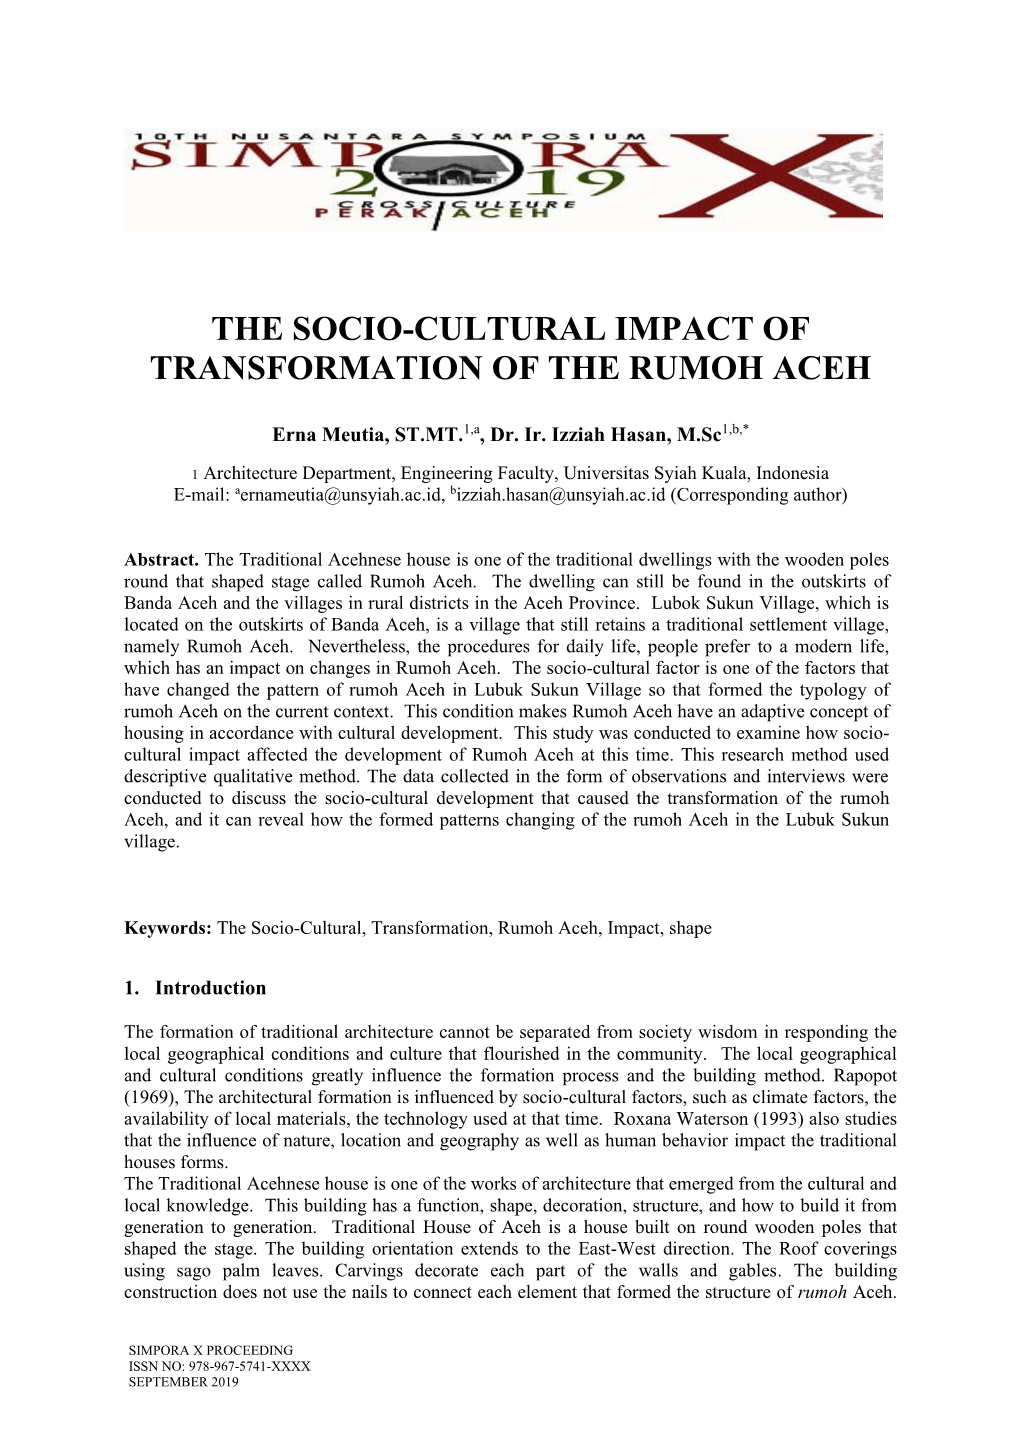 The Socio-Cultural Impact of Transformation of the Rumoh Aceh